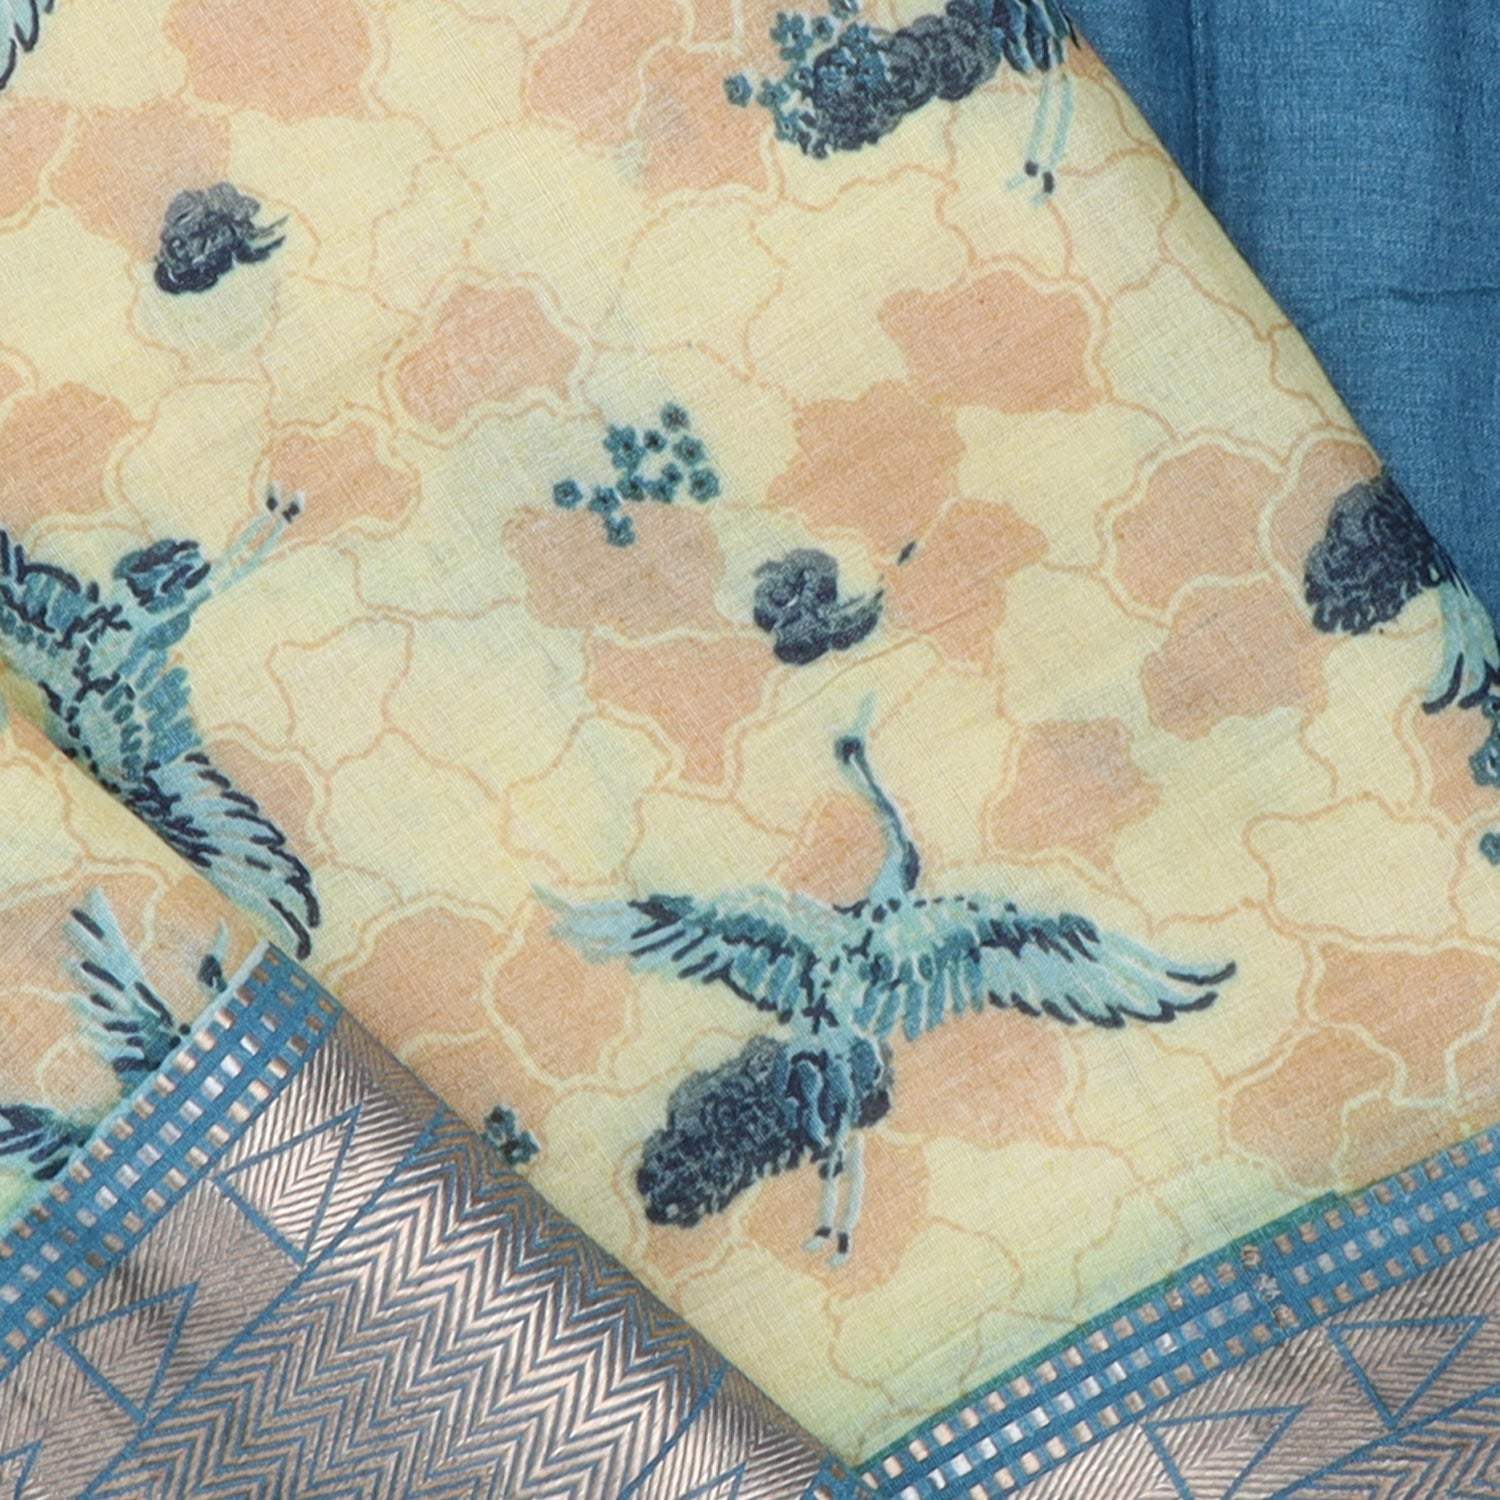 Butter Yellow Cotton Saree With Bird Printed Motifs - Singhania's